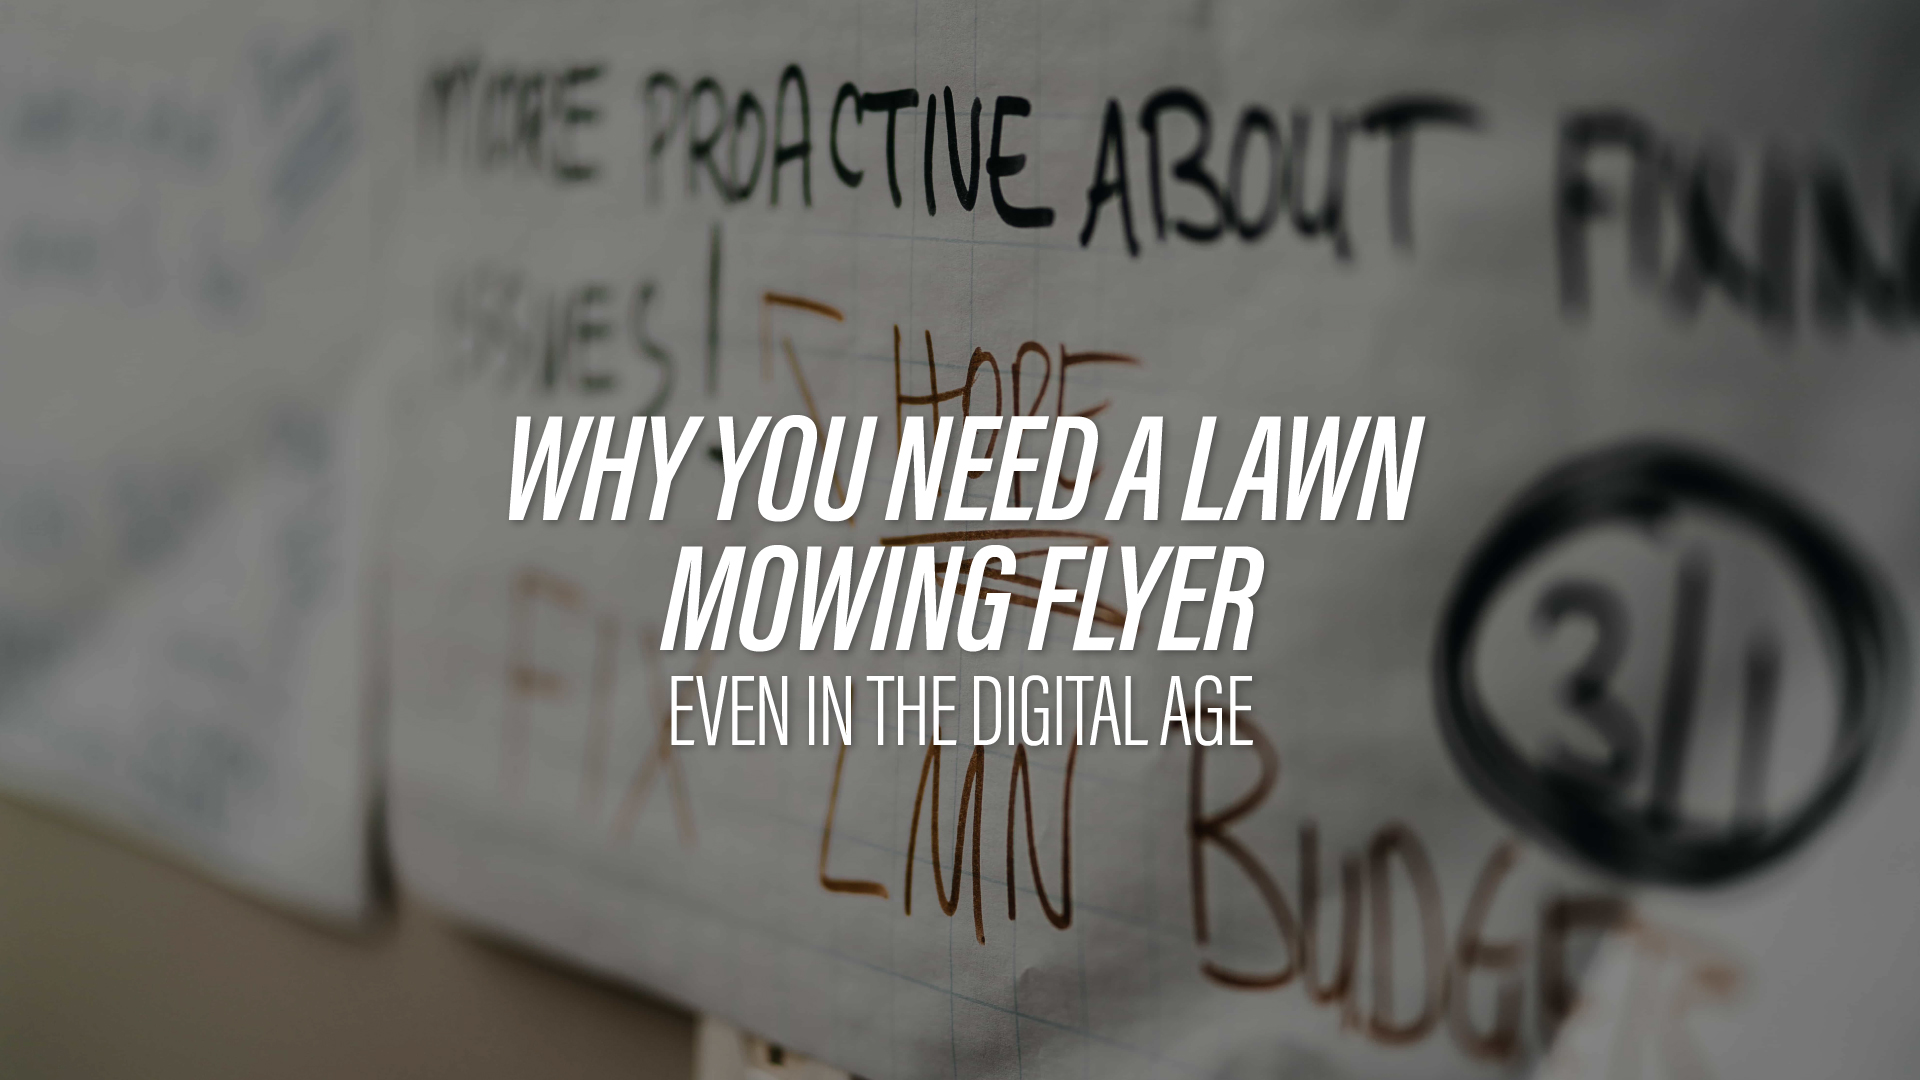 |Two examples of a lawn mowing flyer|||